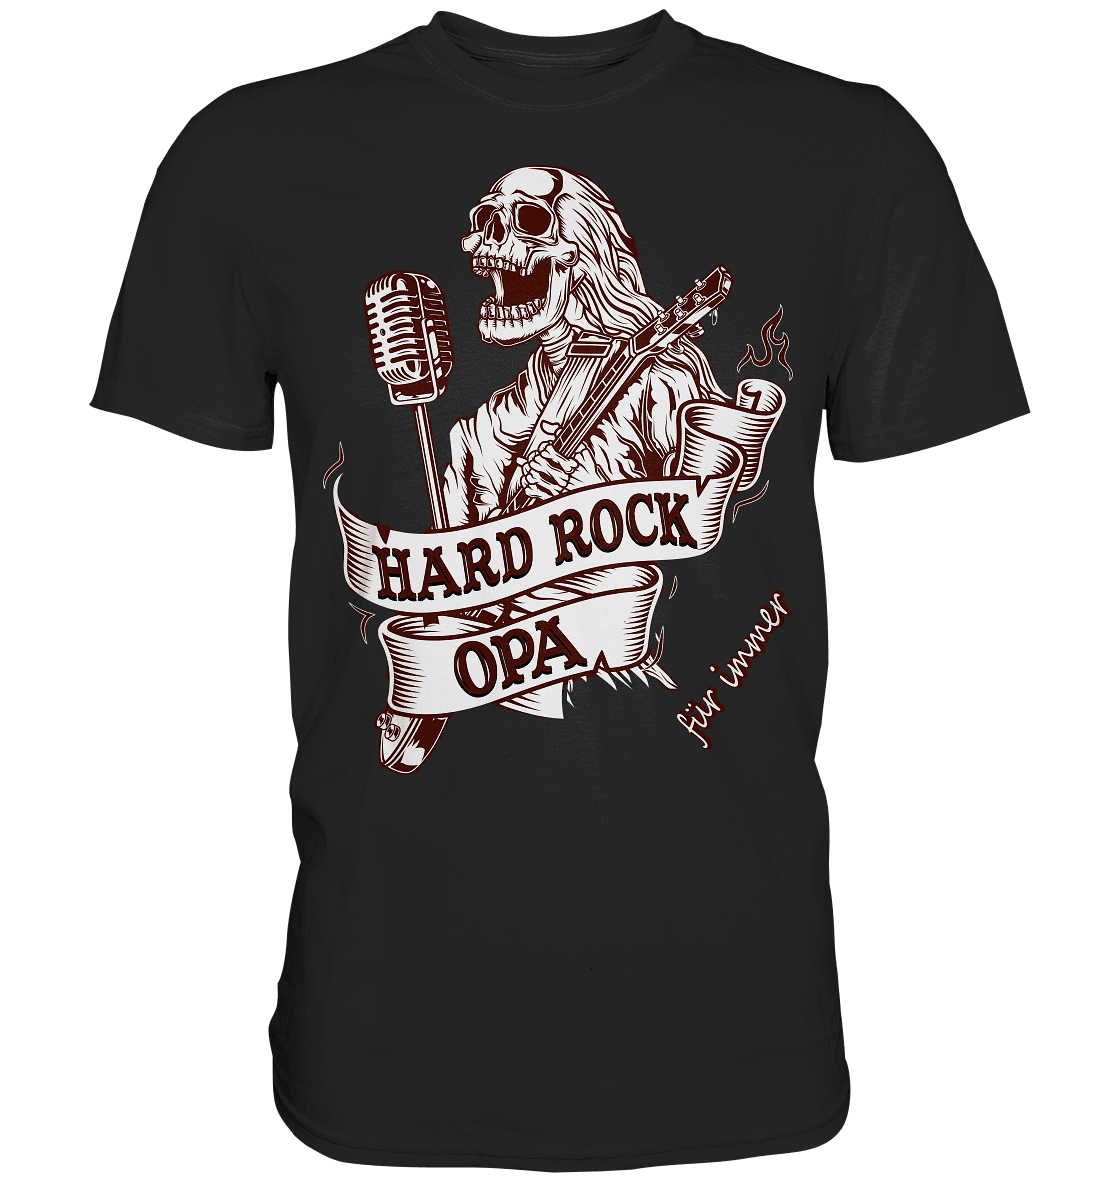 Hard Rock Opa - Shirt - Totally Wasted